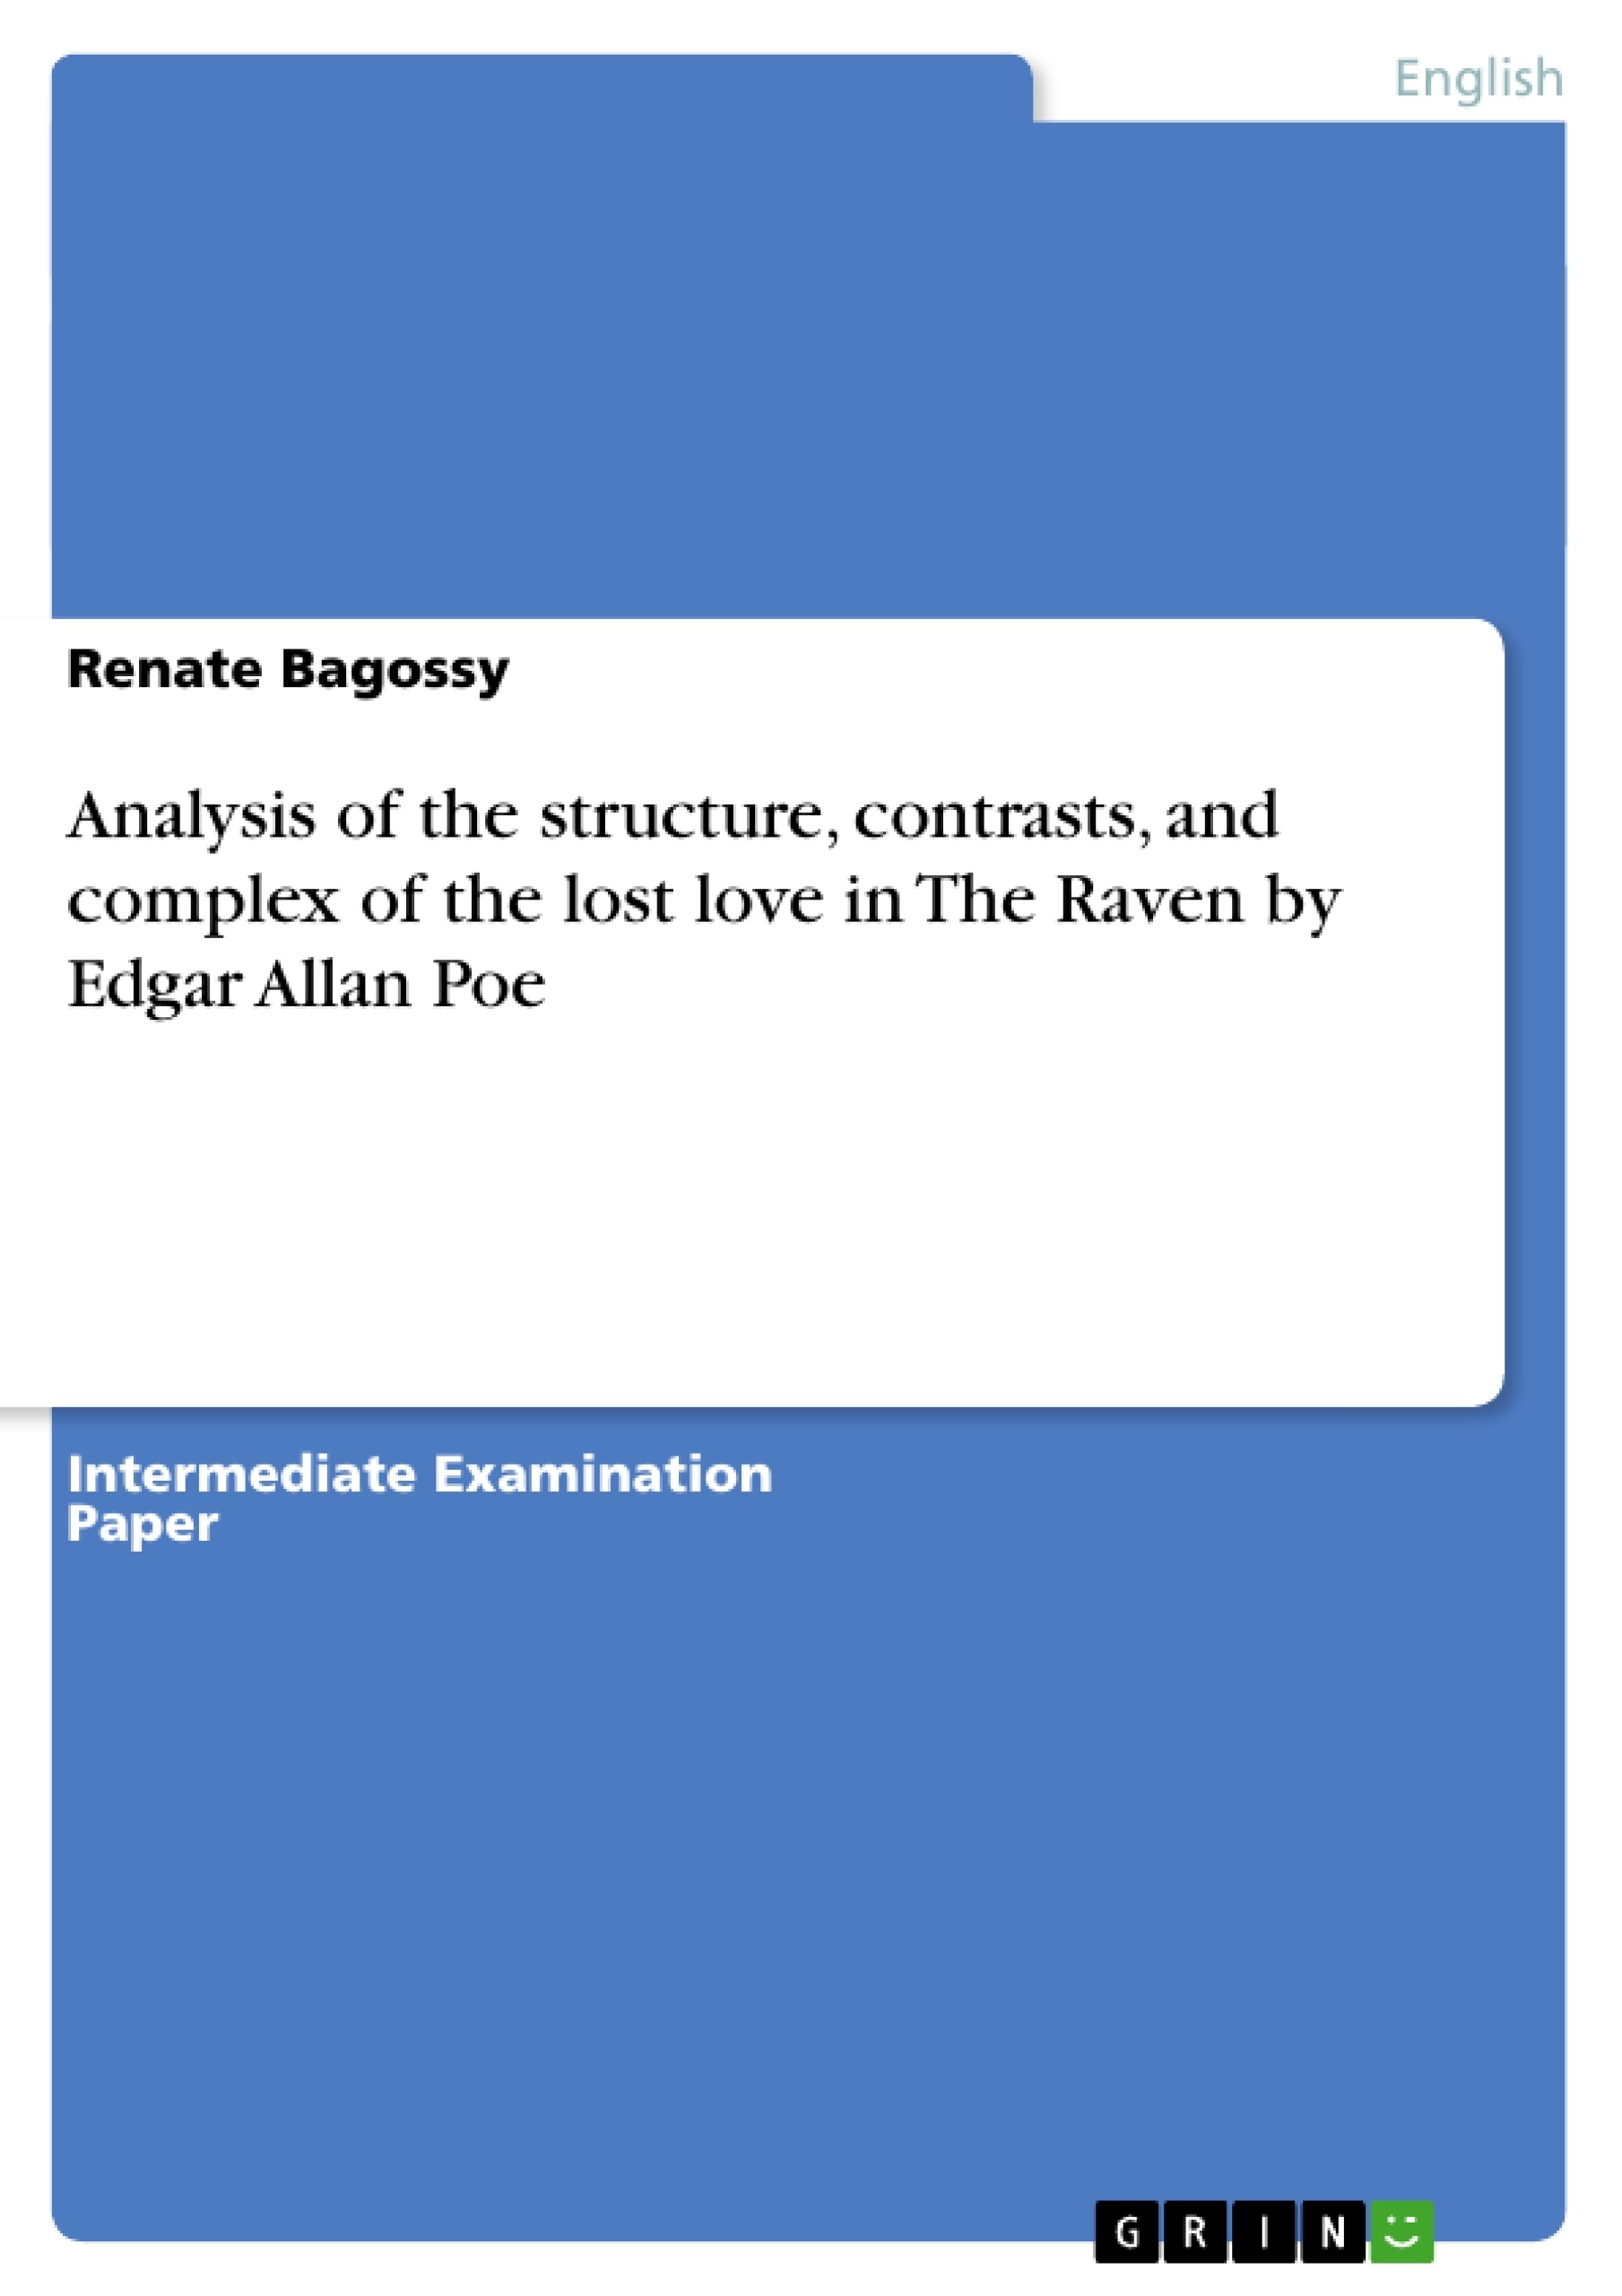 Titre: Analysis of the structure, contrasts, and complex of the lost love in The Raven by Edgar Allan Poe